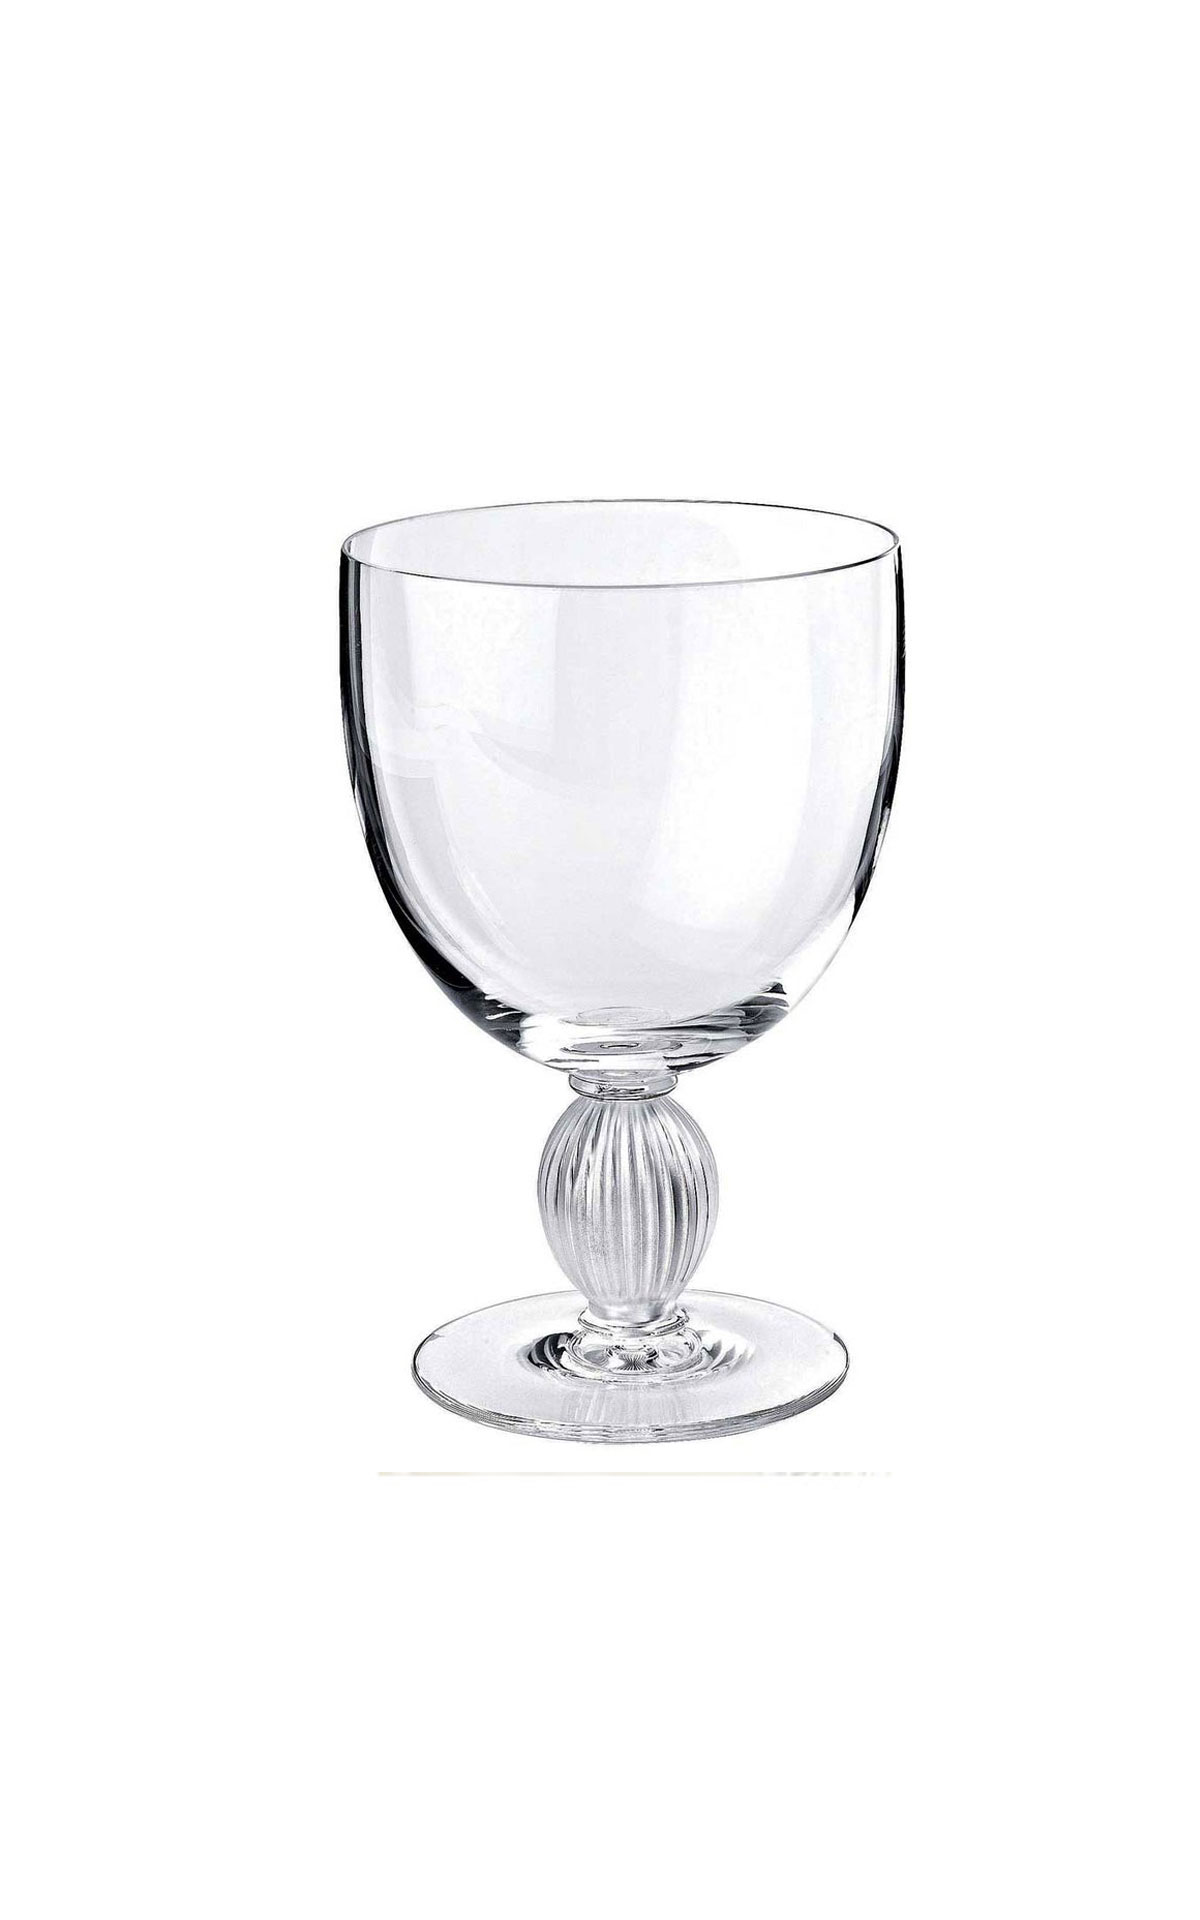 Lalique Langeais wine glass from Bicester Village